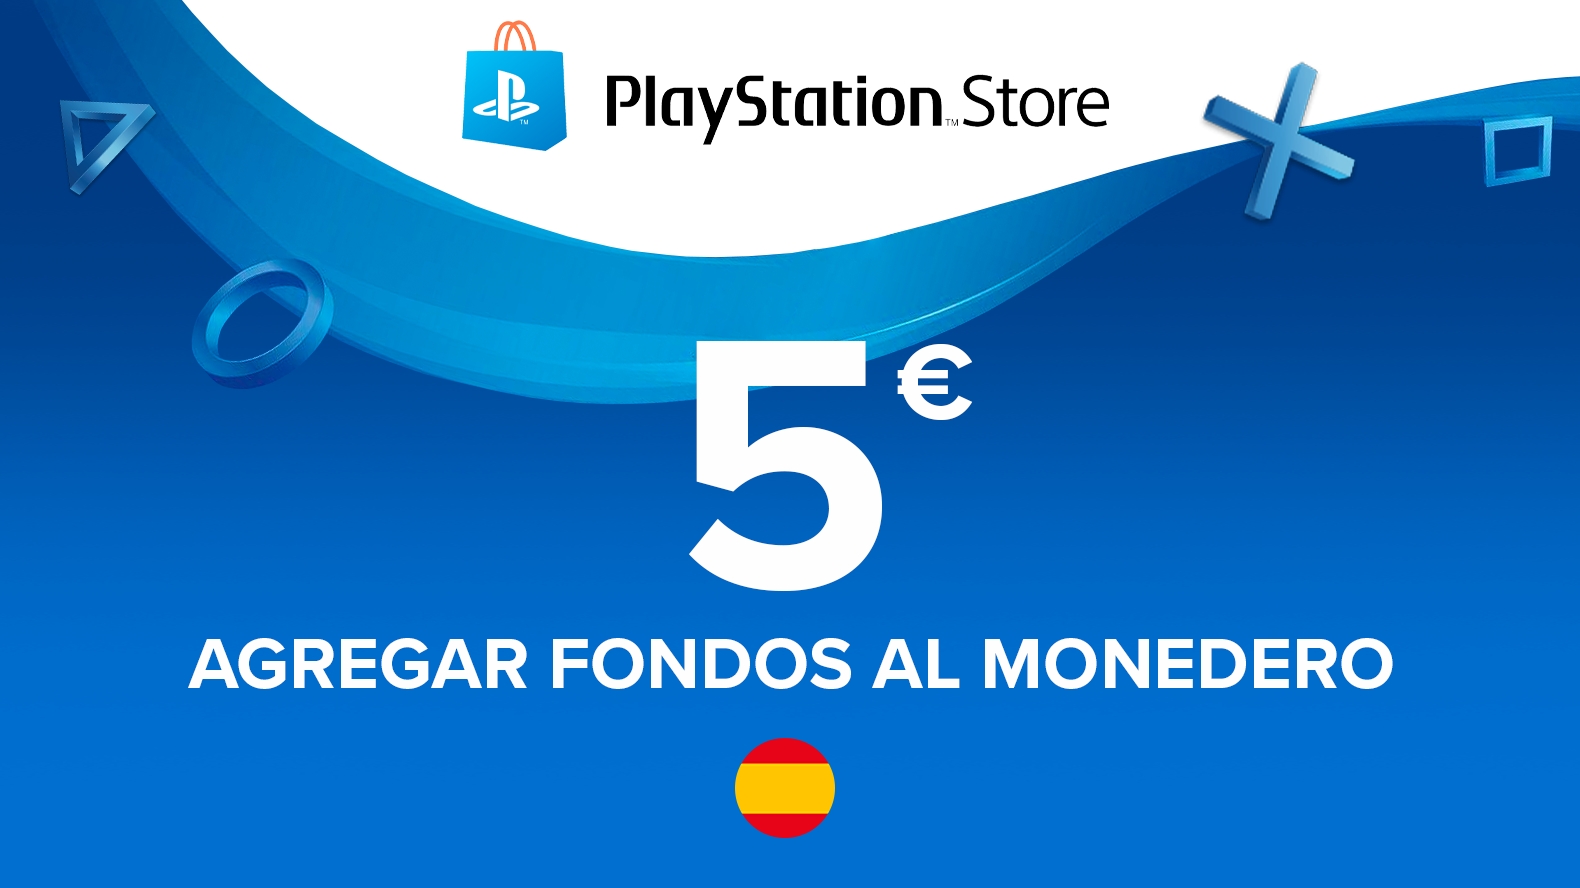 5 euro gift card ps4